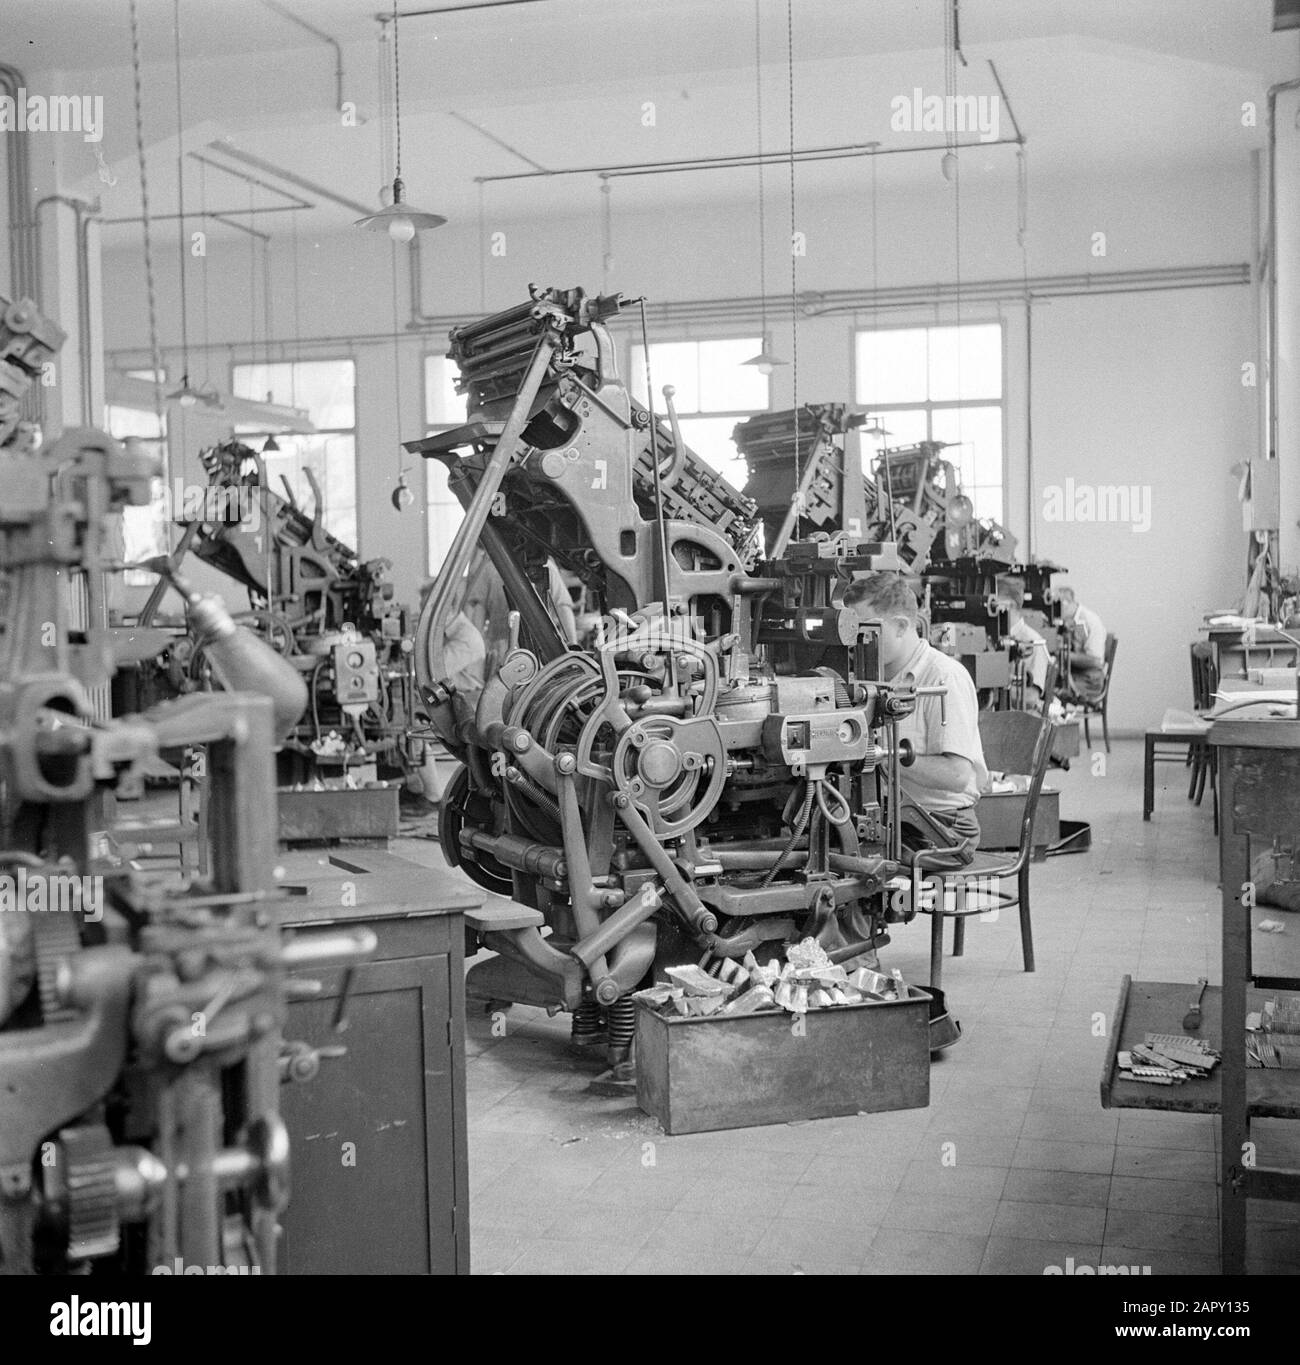 Israel 1948-1949: daily Dawar Employees in the lynotype typesetting Date:  Mon 1949 may 16 Location: Israel, Tel Aviv Keywords: printing, graphic  arts, newspapers, machines, media, press : Poll, Willem van de Stock Photo  - Alamy